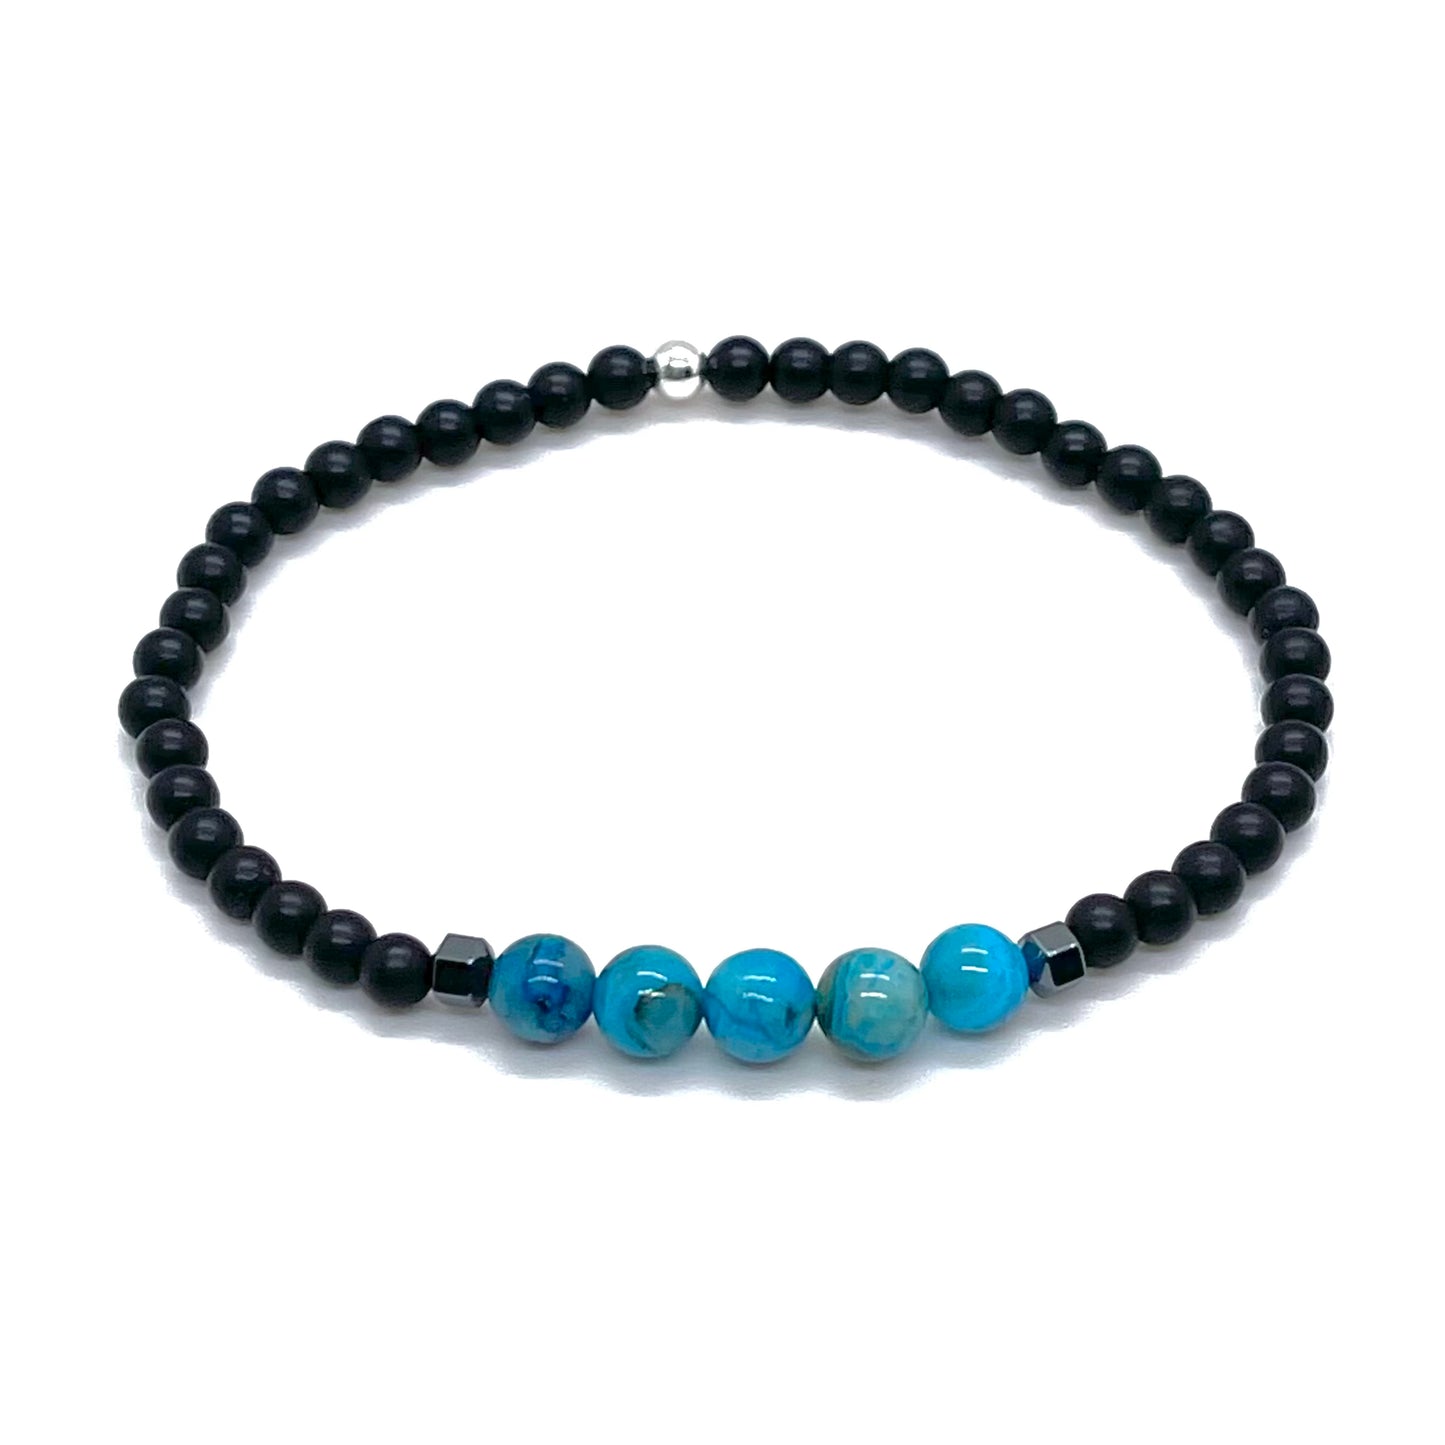 Mens turquoise dyed agate beaded bracelet with black onyx and hematite beads.